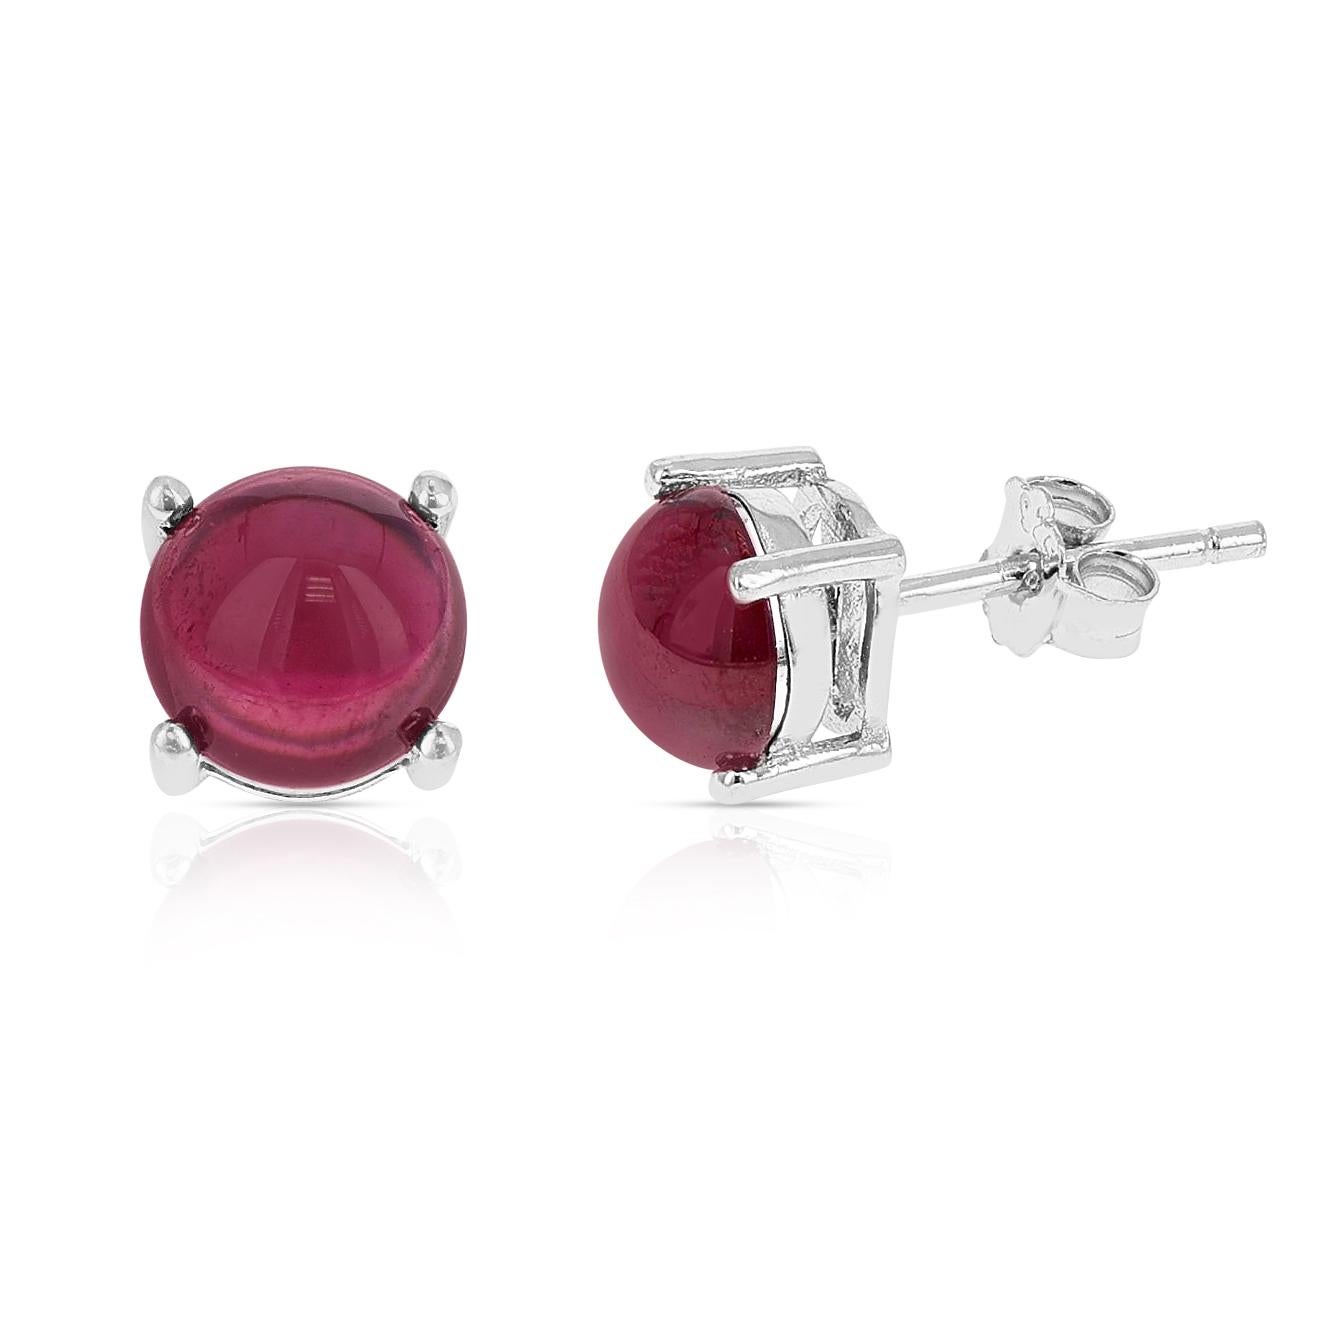 Round Cut Genuine Tourmaline Round Cabochon Stud Earrings, Sterling Silver